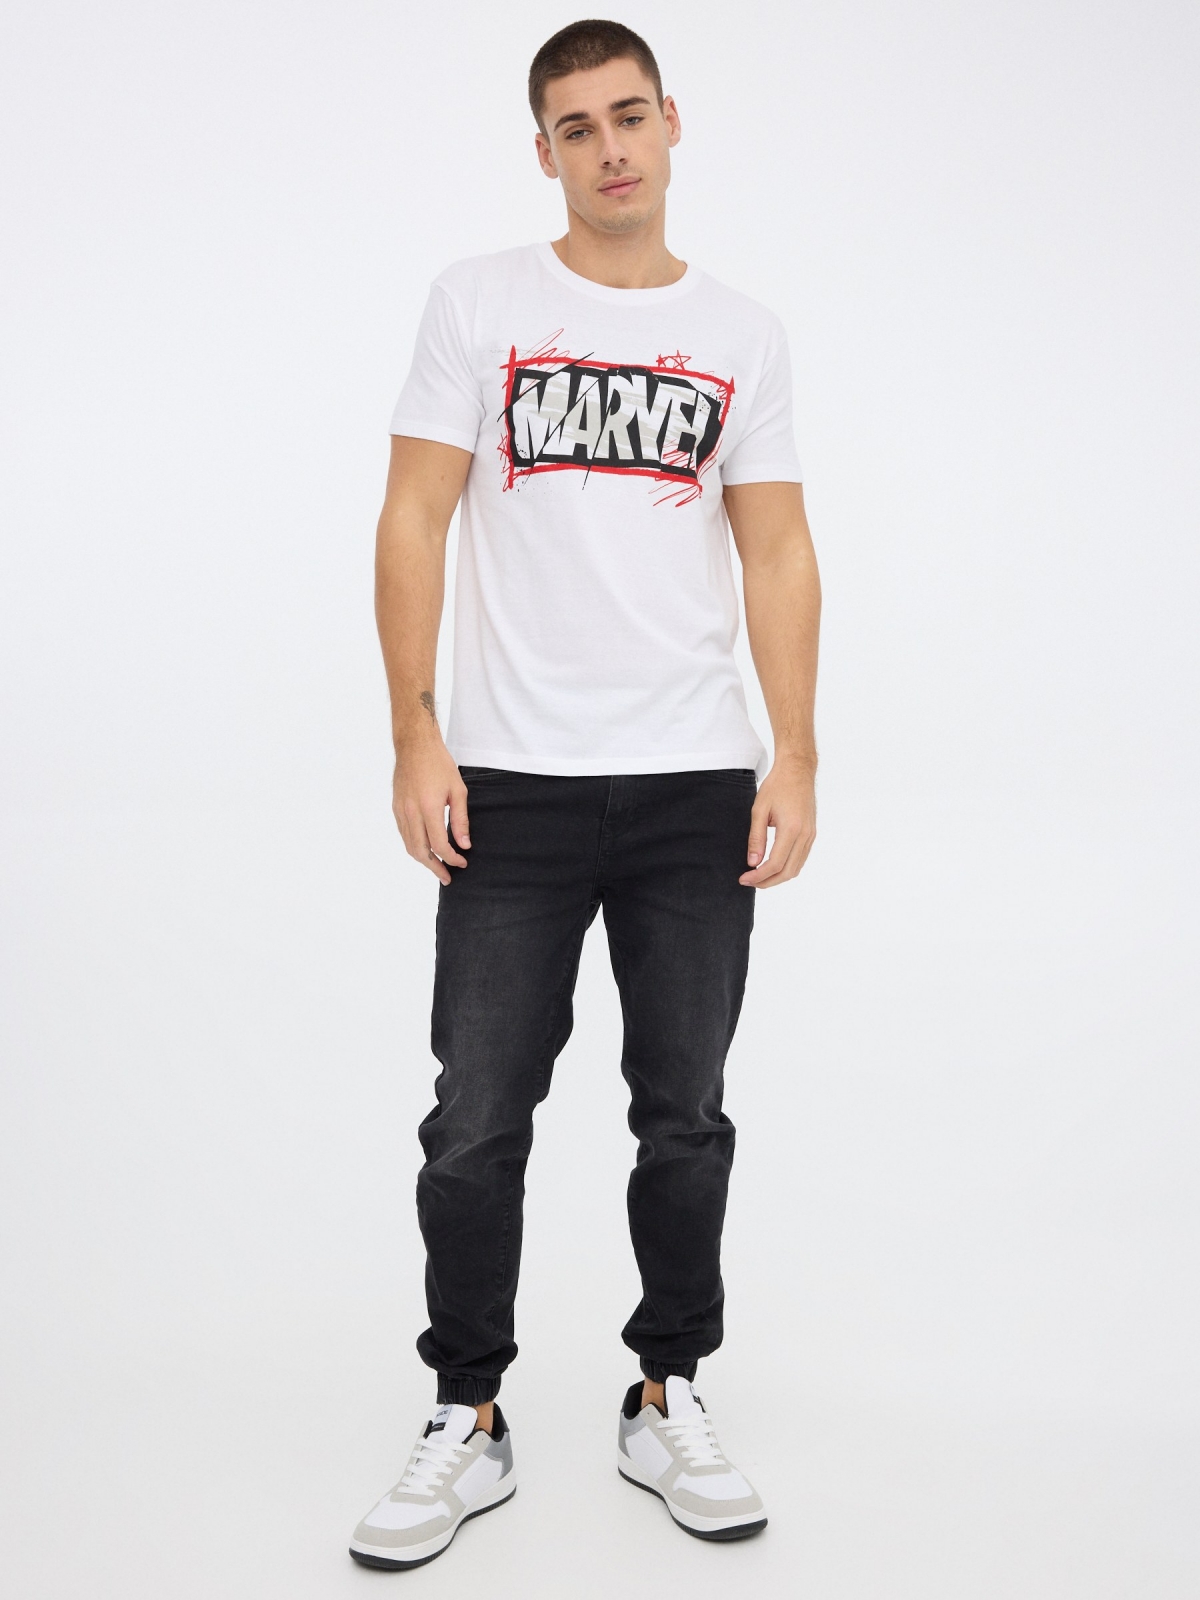 Marvel t-shirt white front view